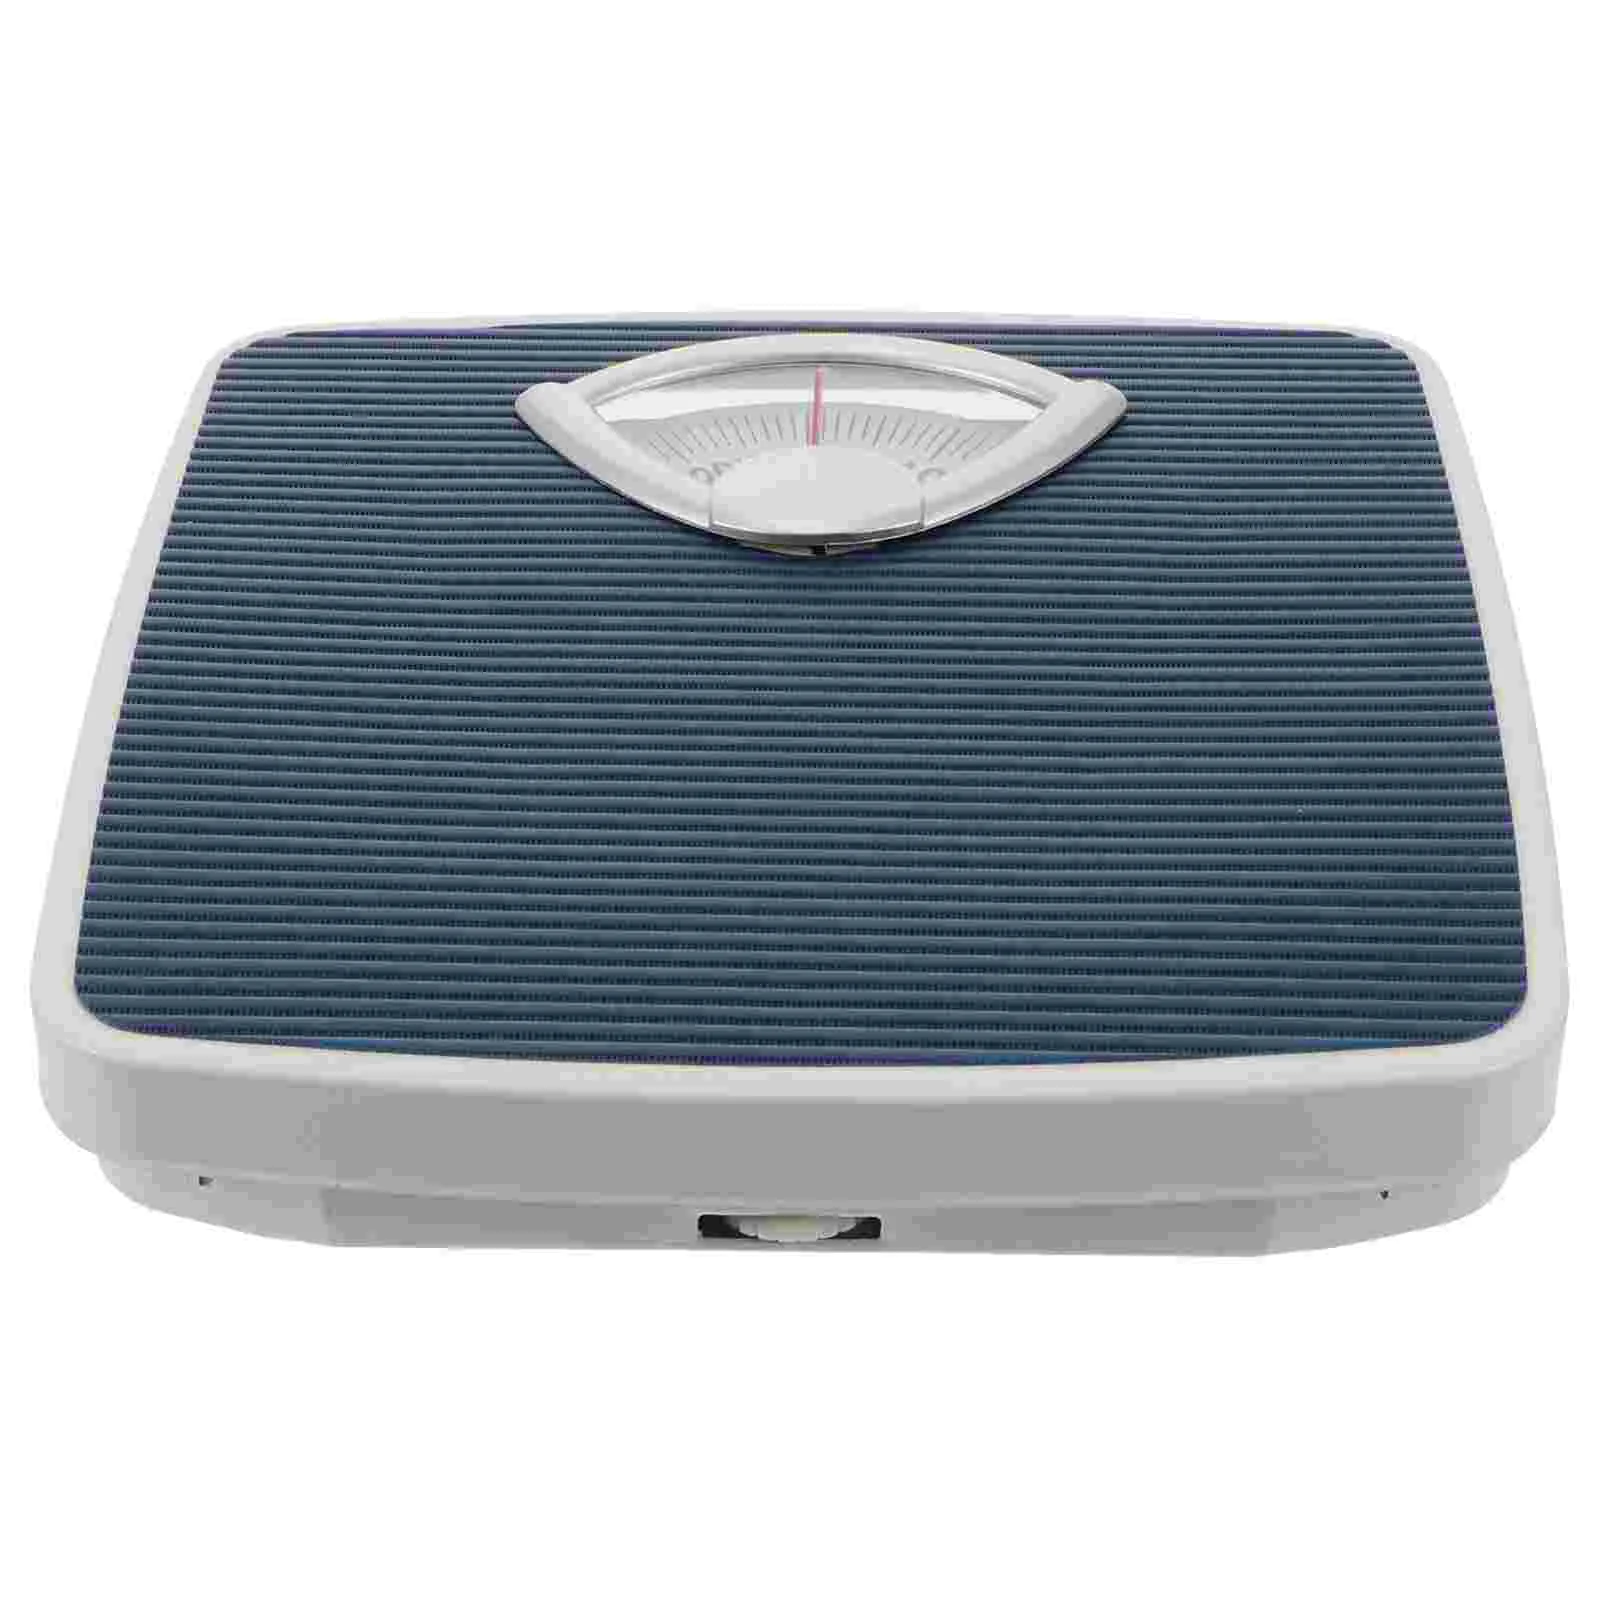 

Digital Scales For Body Weight Weighing Scale Dial Weight Rotating for Bathroom Precision Body Mechanical Home